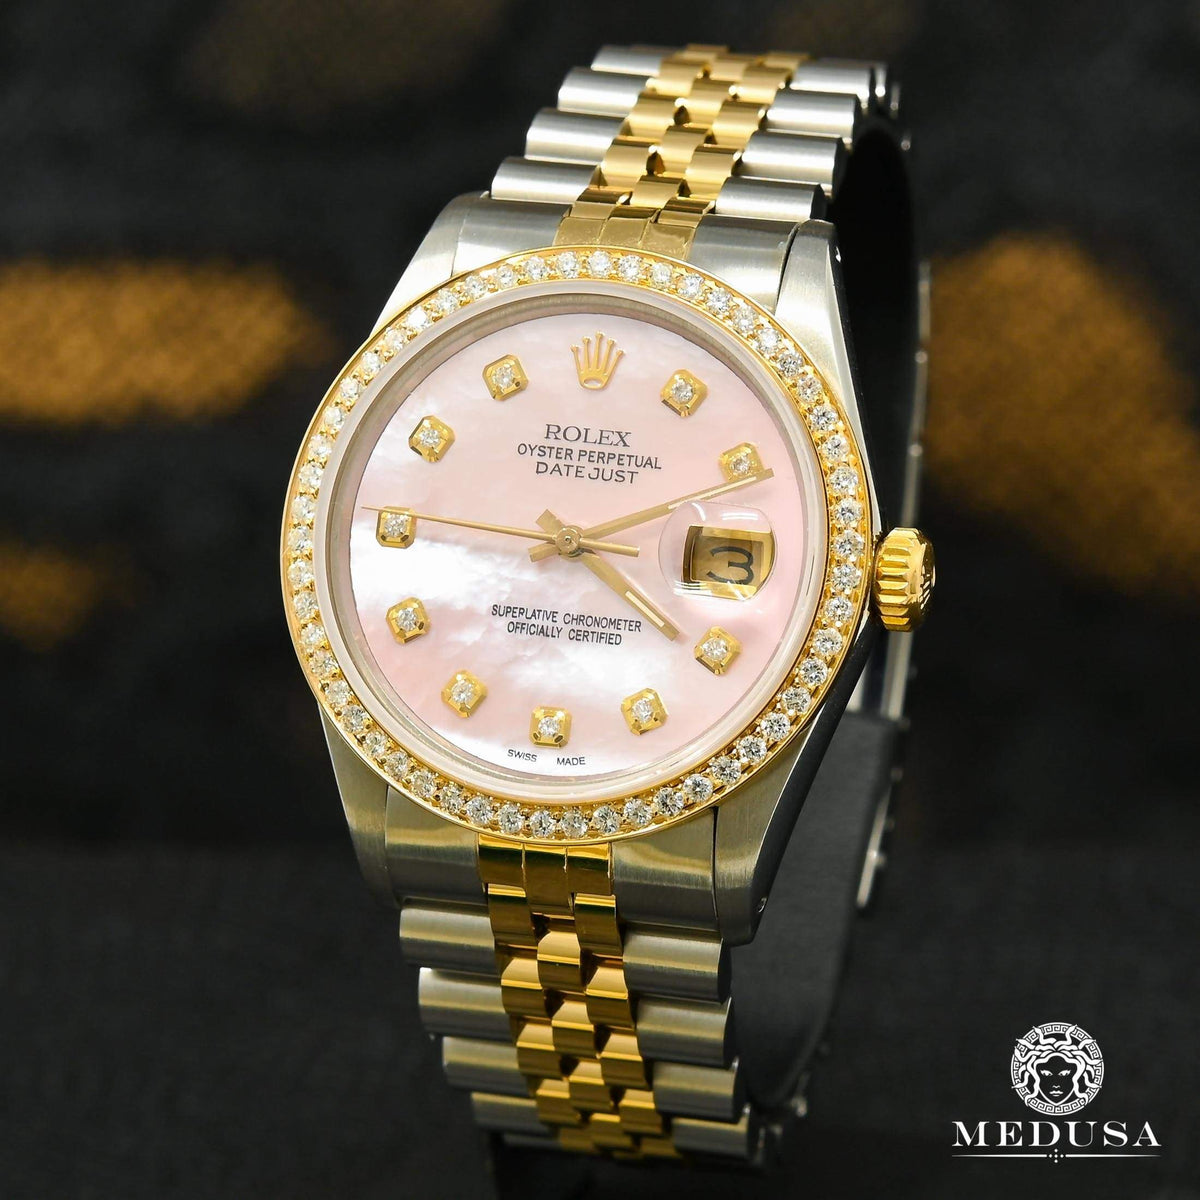 Montre Rolex | Montre Homme Rolex Datejust 36mm - Pink ’’Mother of Pearl’’ Or 2 Tons